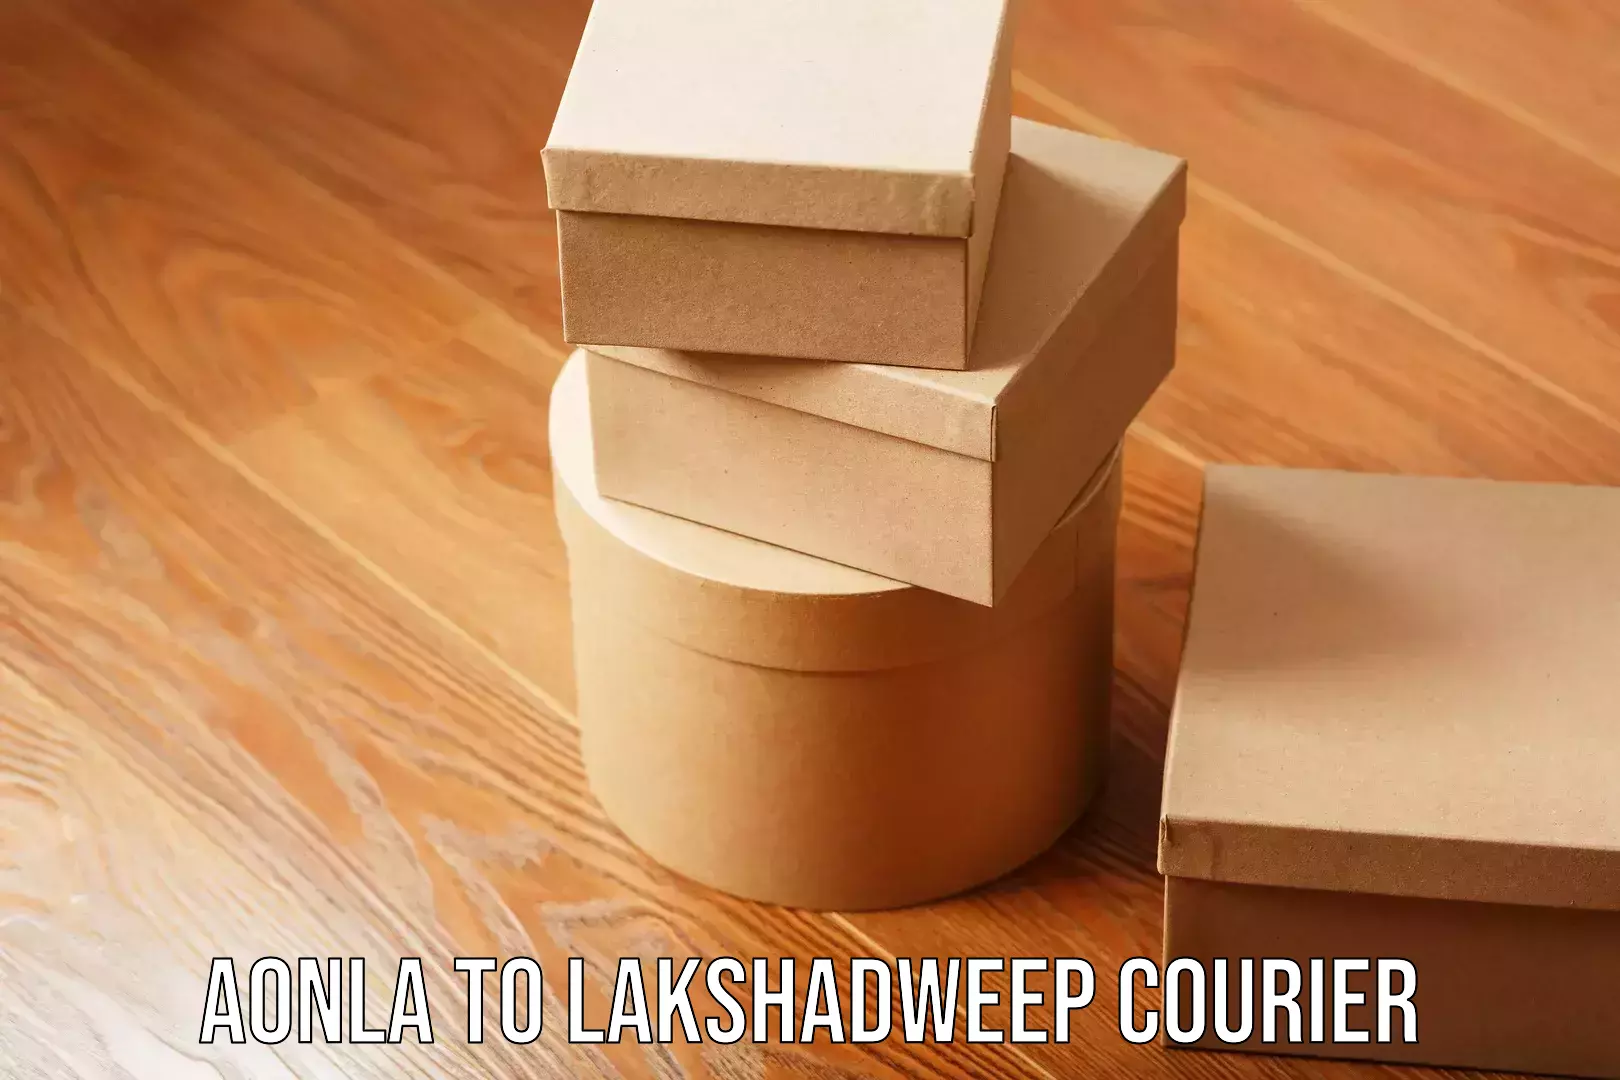 Subscription-based courier Aonla to Lakshadweep